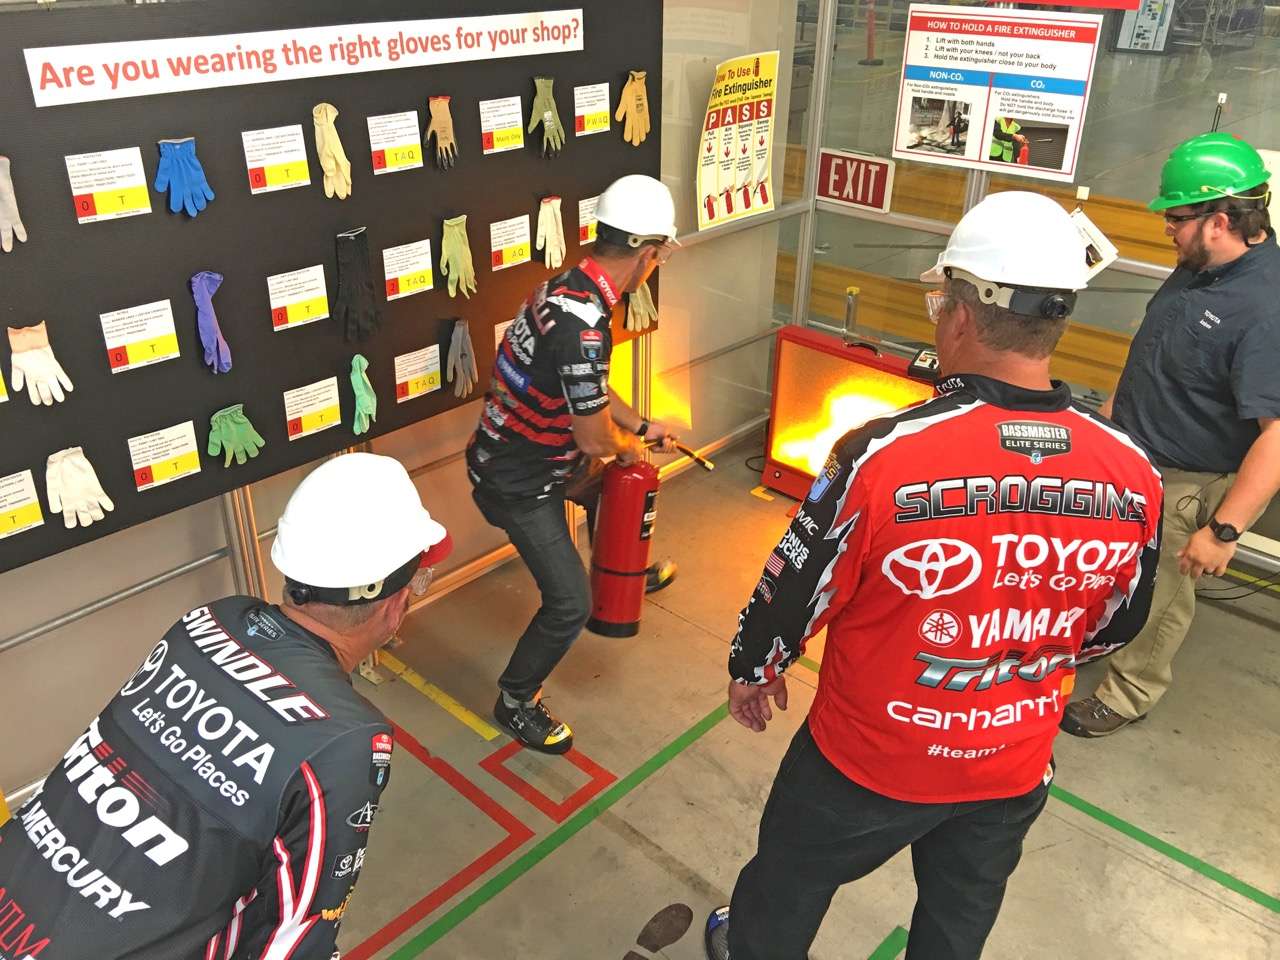 Each of the three pros tried their hand at proper fire extinguisher use in the safety training area.
